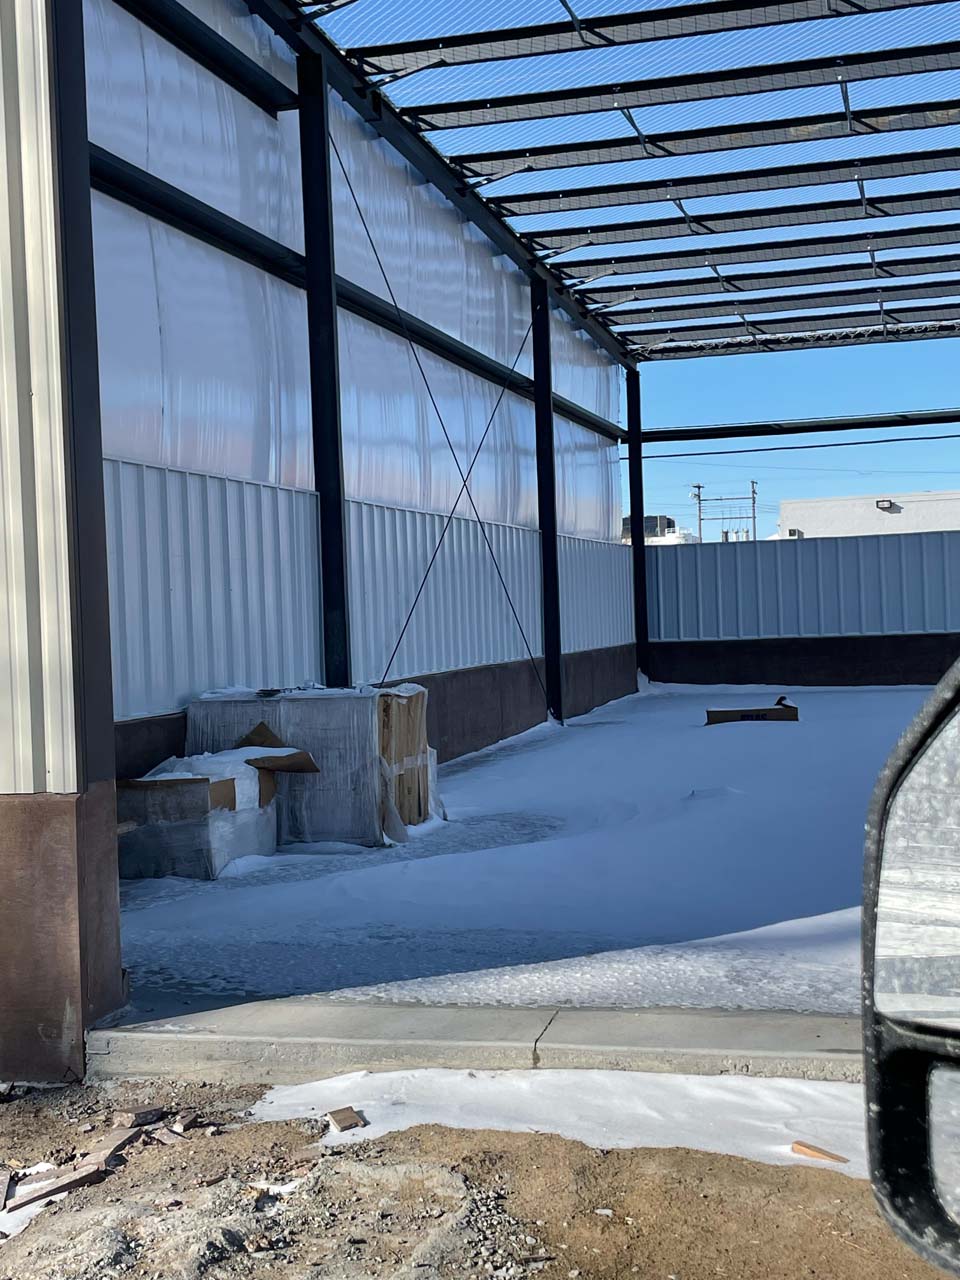 A metal building doesn't have a roof yet and snow is inside